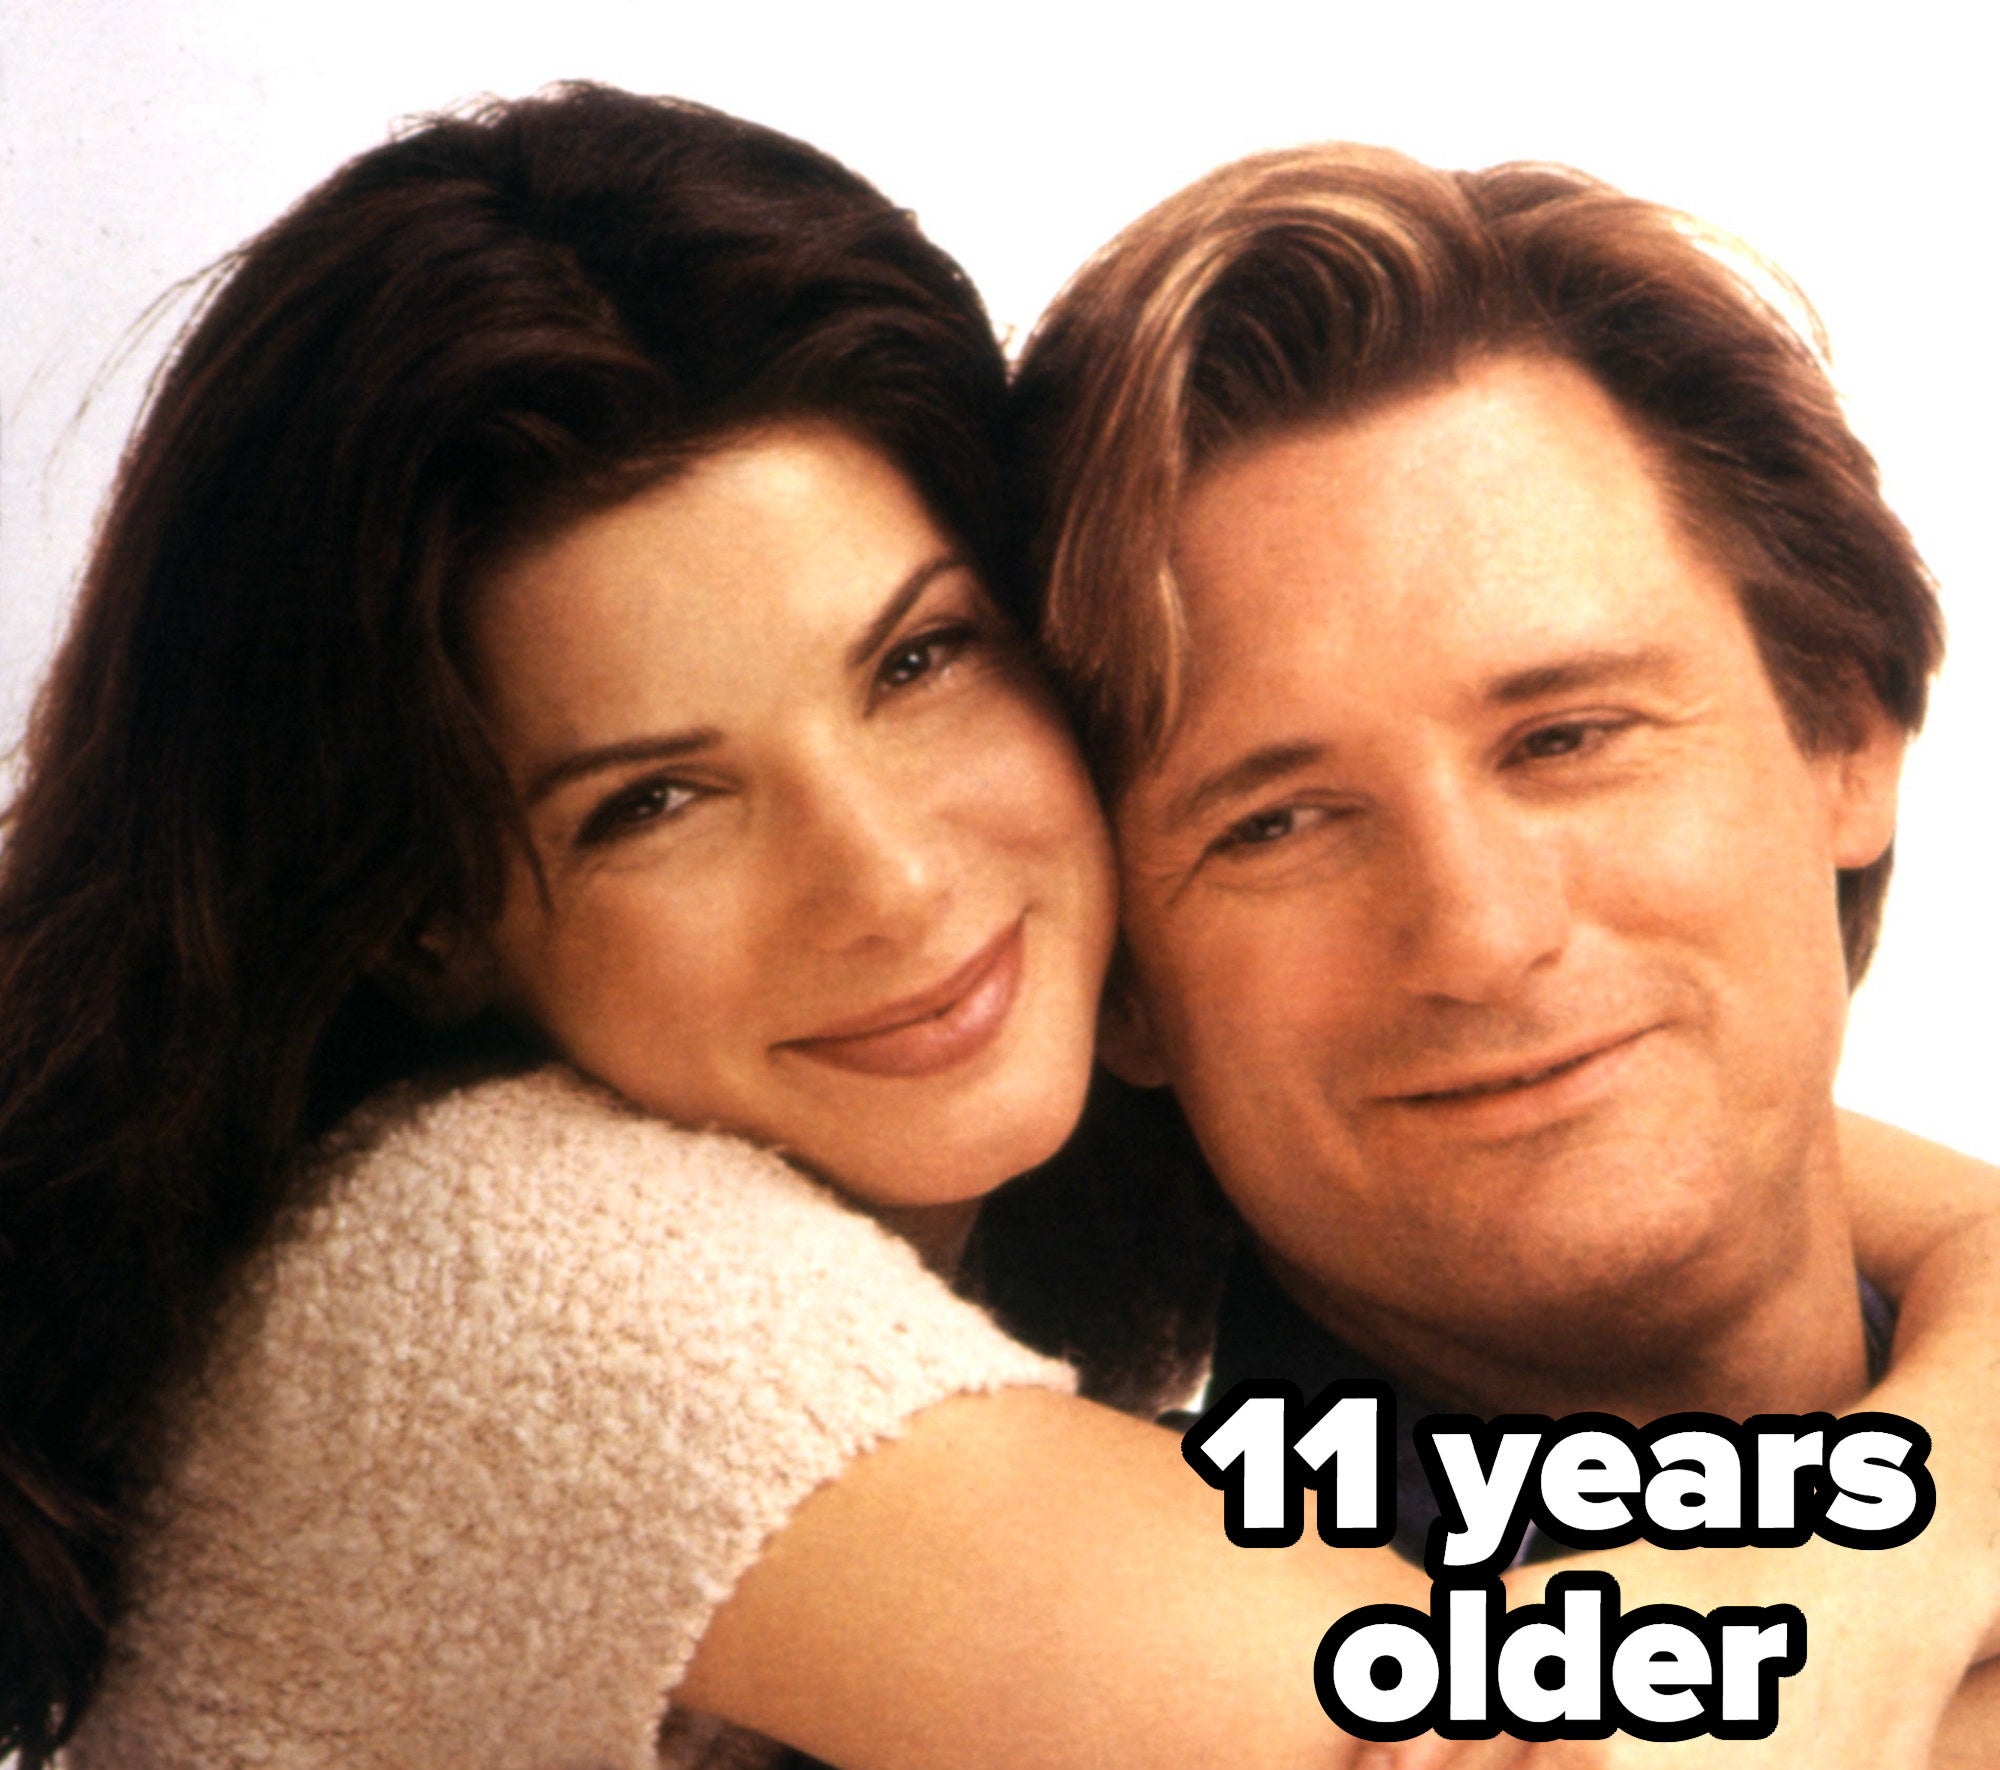 Sandra Bullock and Bill Pullman in While You Were Sleeping